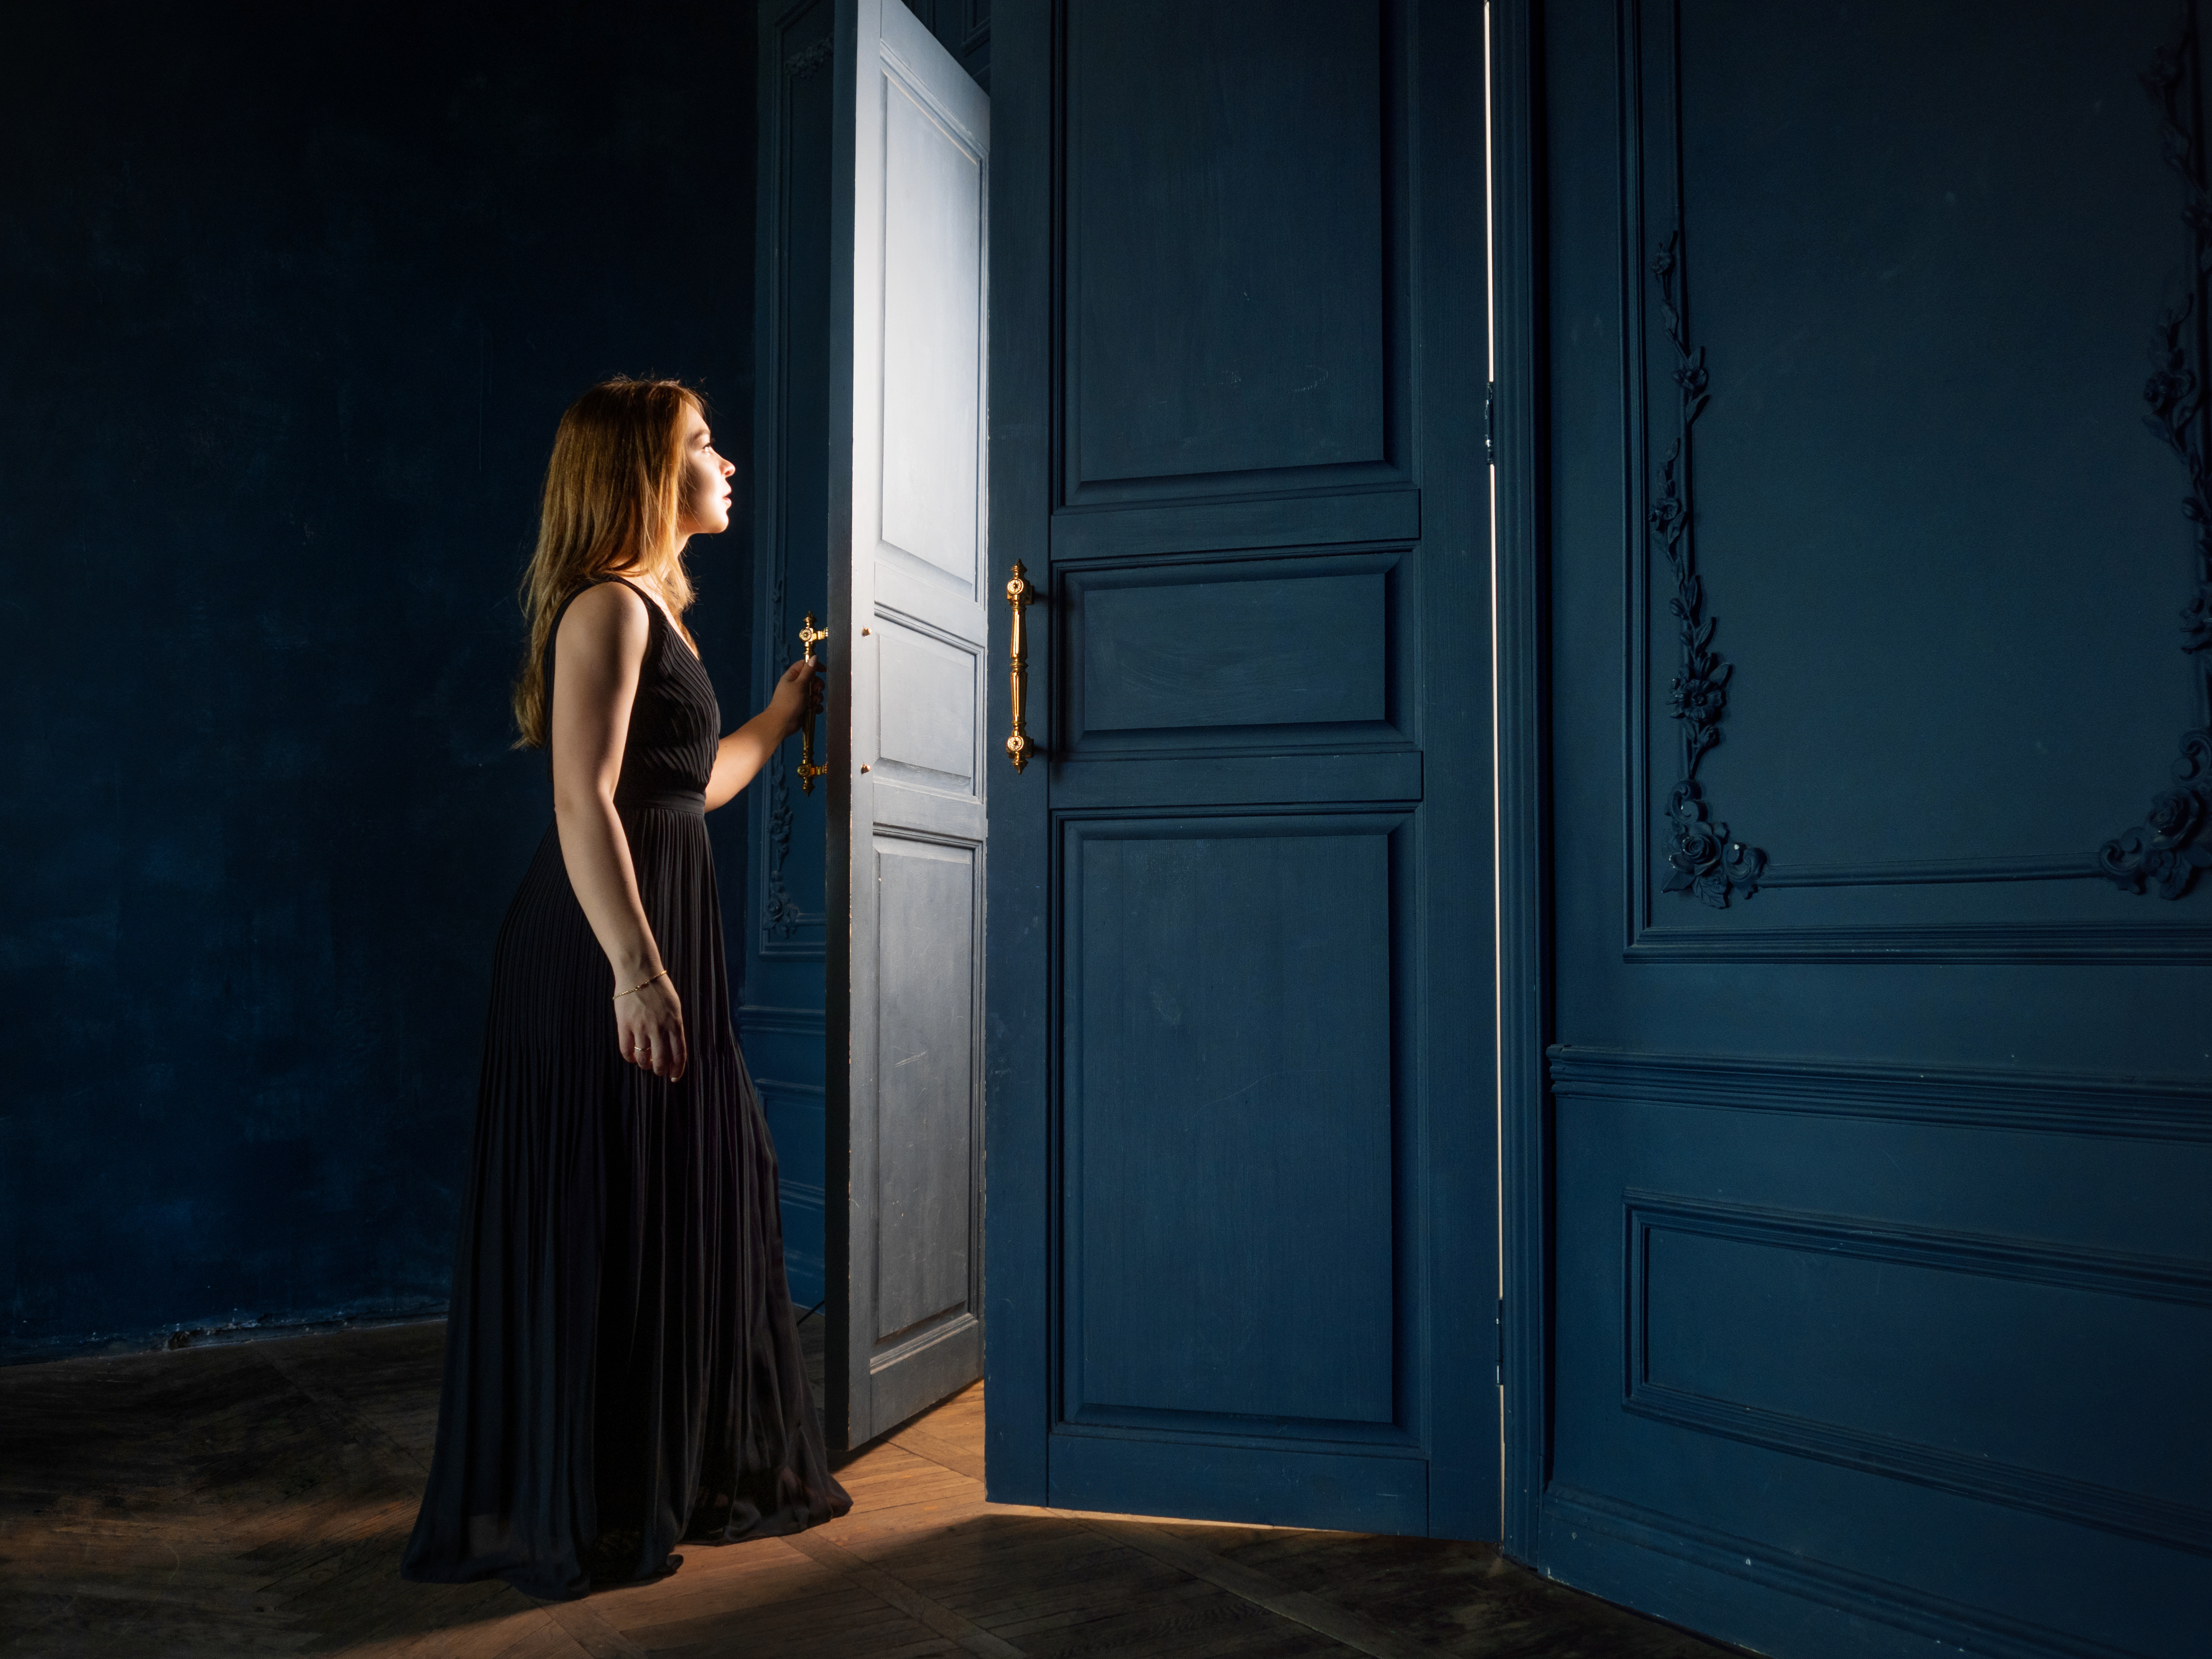 Woman opening a door to a room | Source: Shutterstock